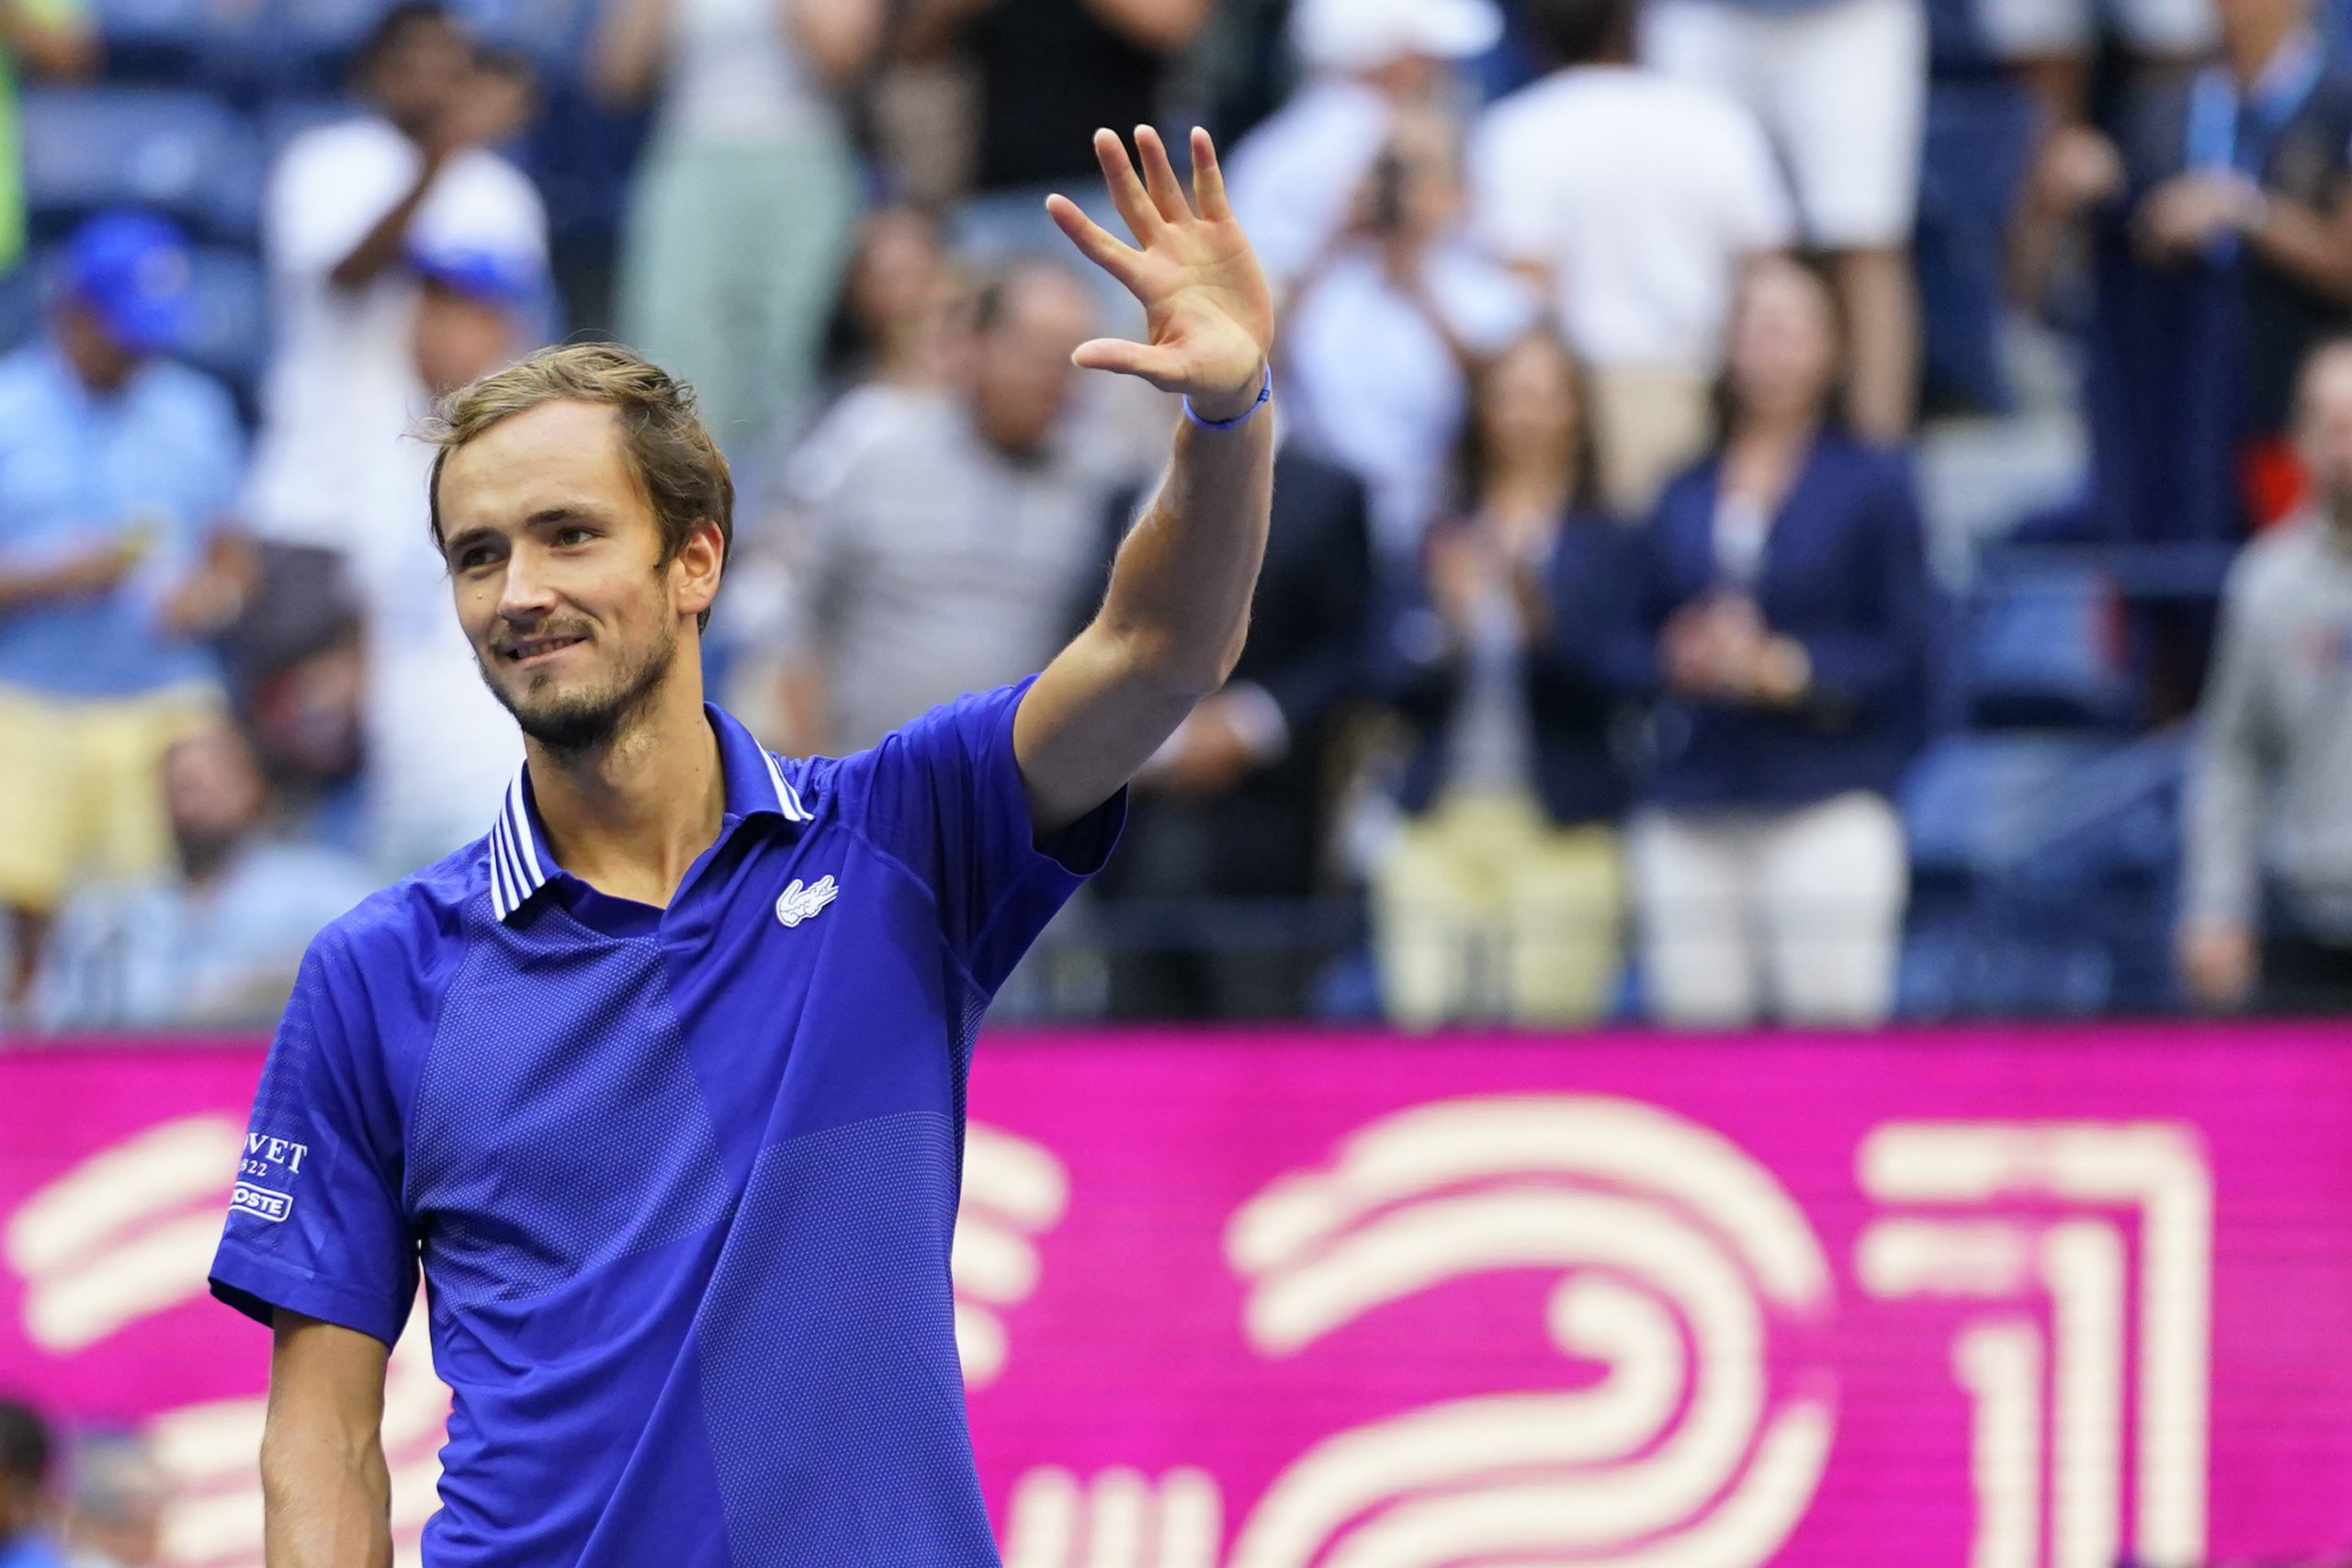 Daniil Medvedev of Russia waves to the crowd after his match against Felix Auger-Aliassime of Canada (not pictured) on day twelve of the 2021 U.S. Open tennis tournament at USTA 